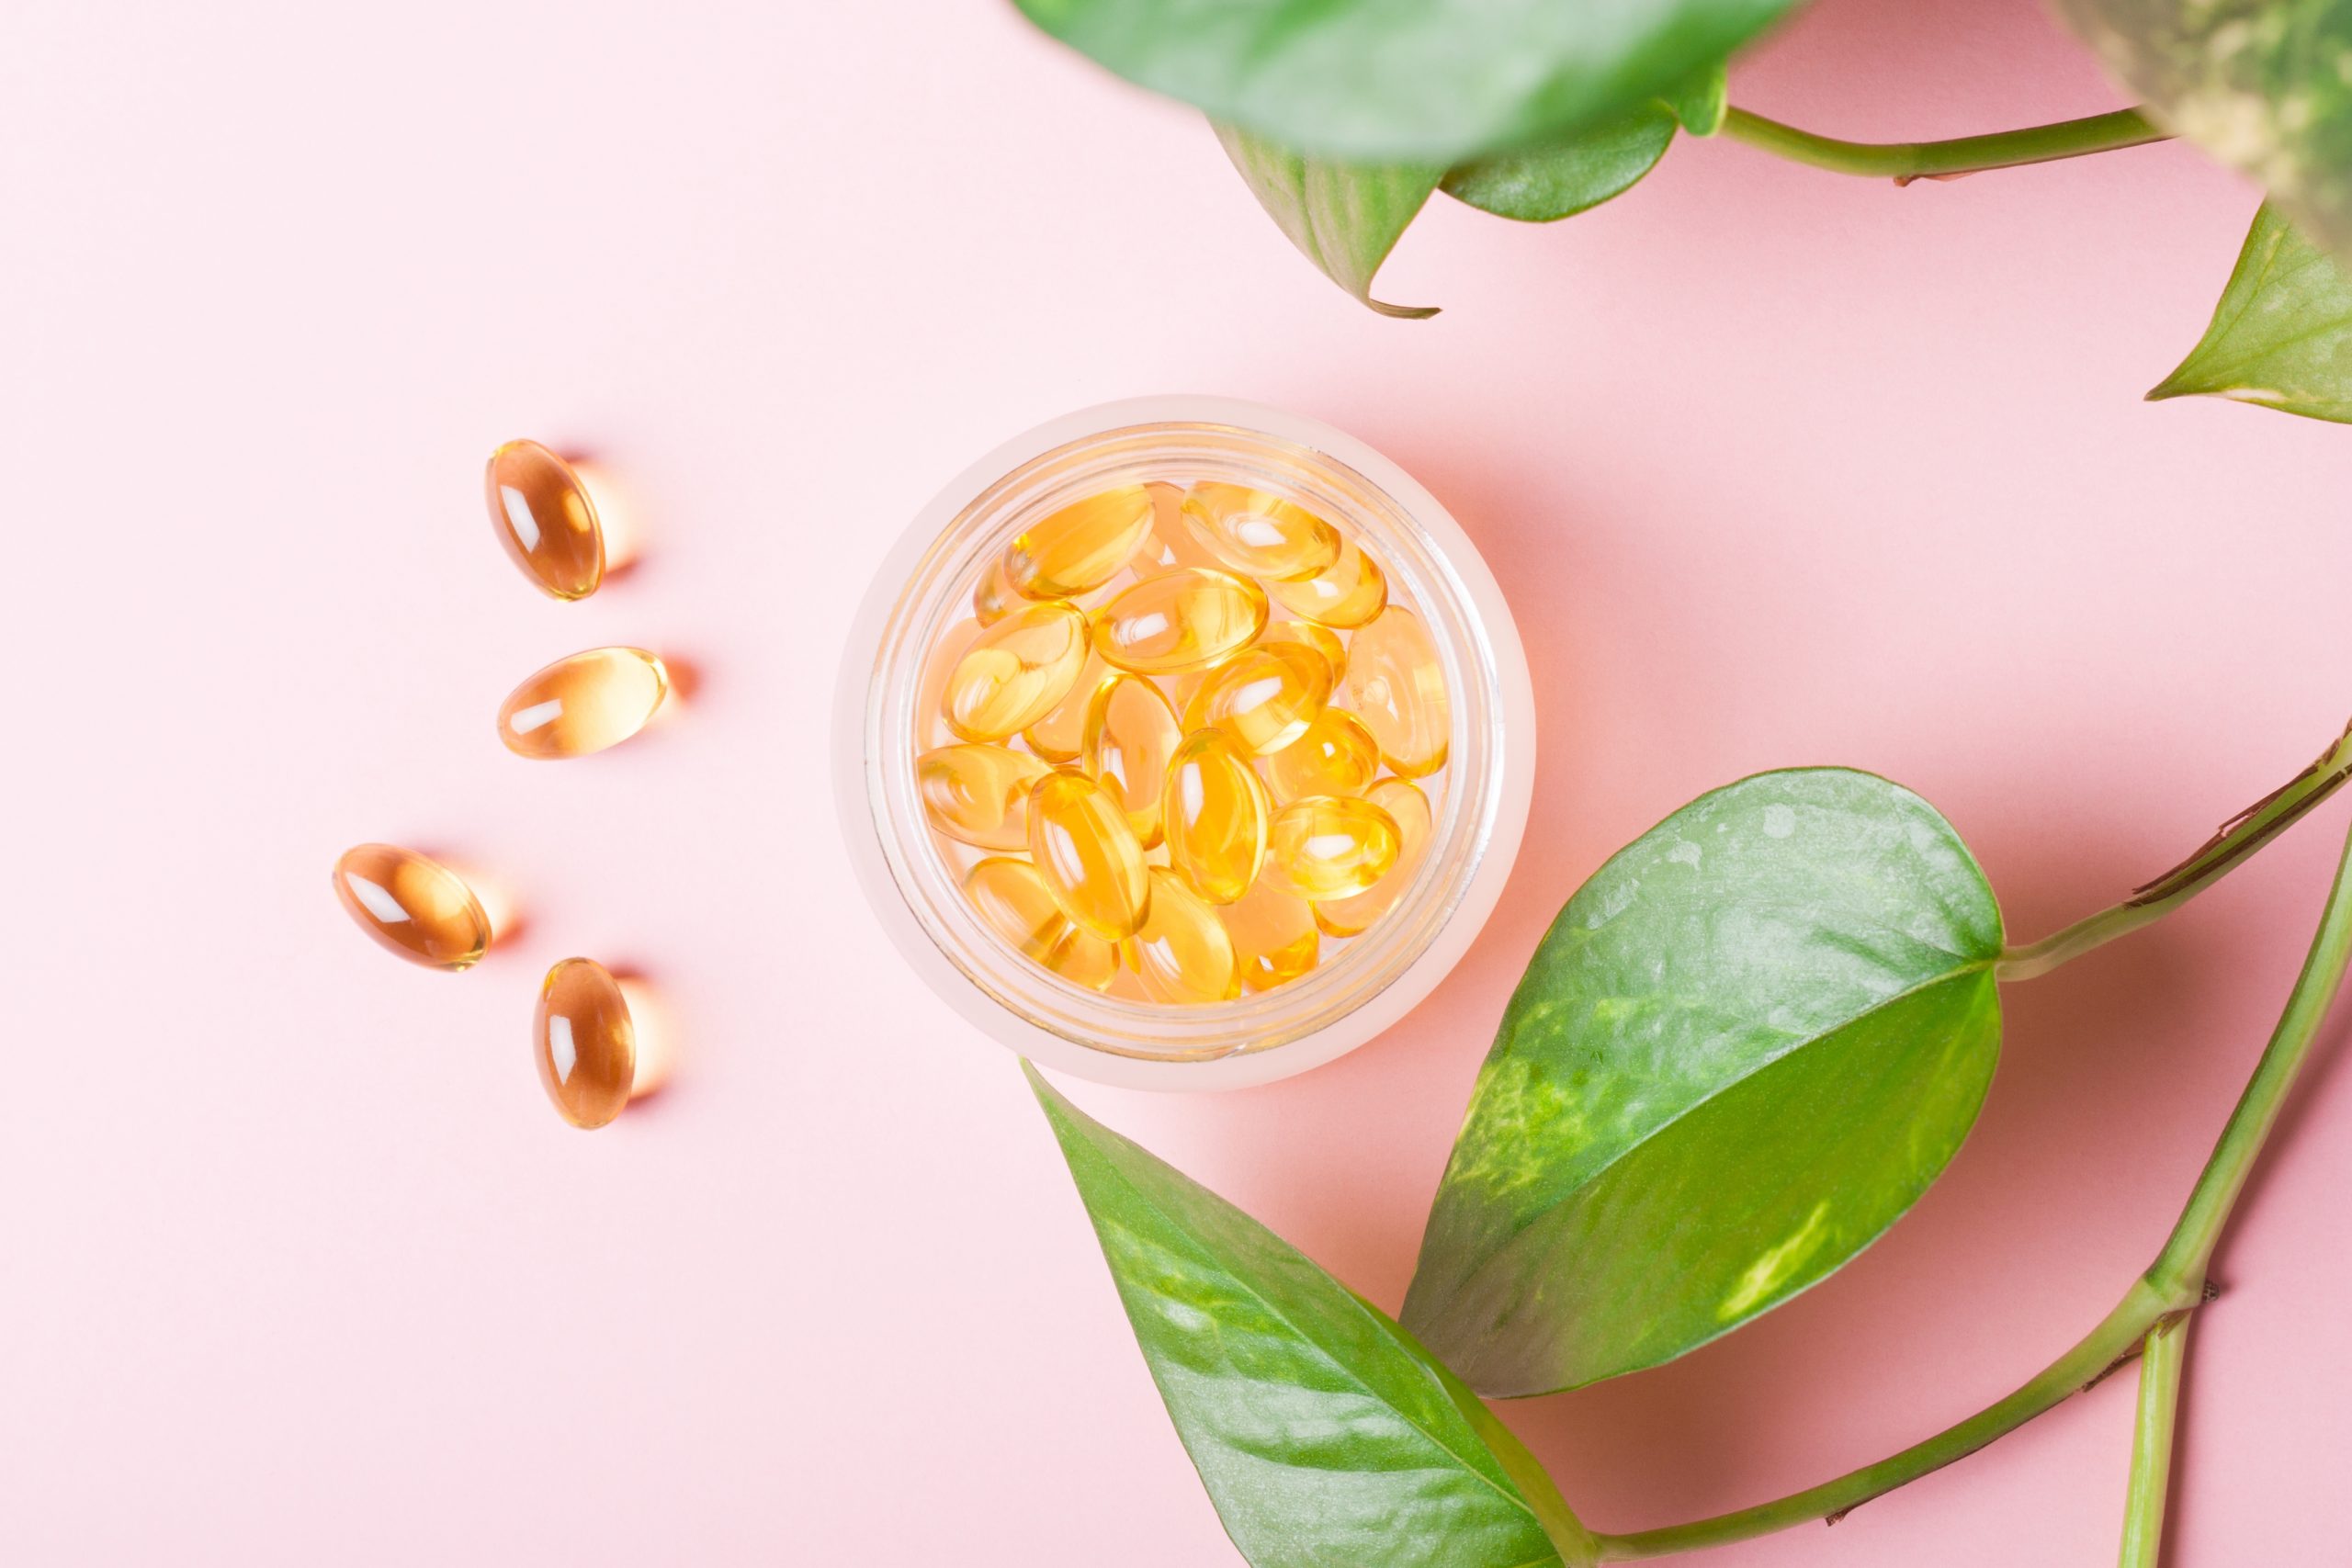 Fish Oil Capsules (omega 3) On A Pink Background